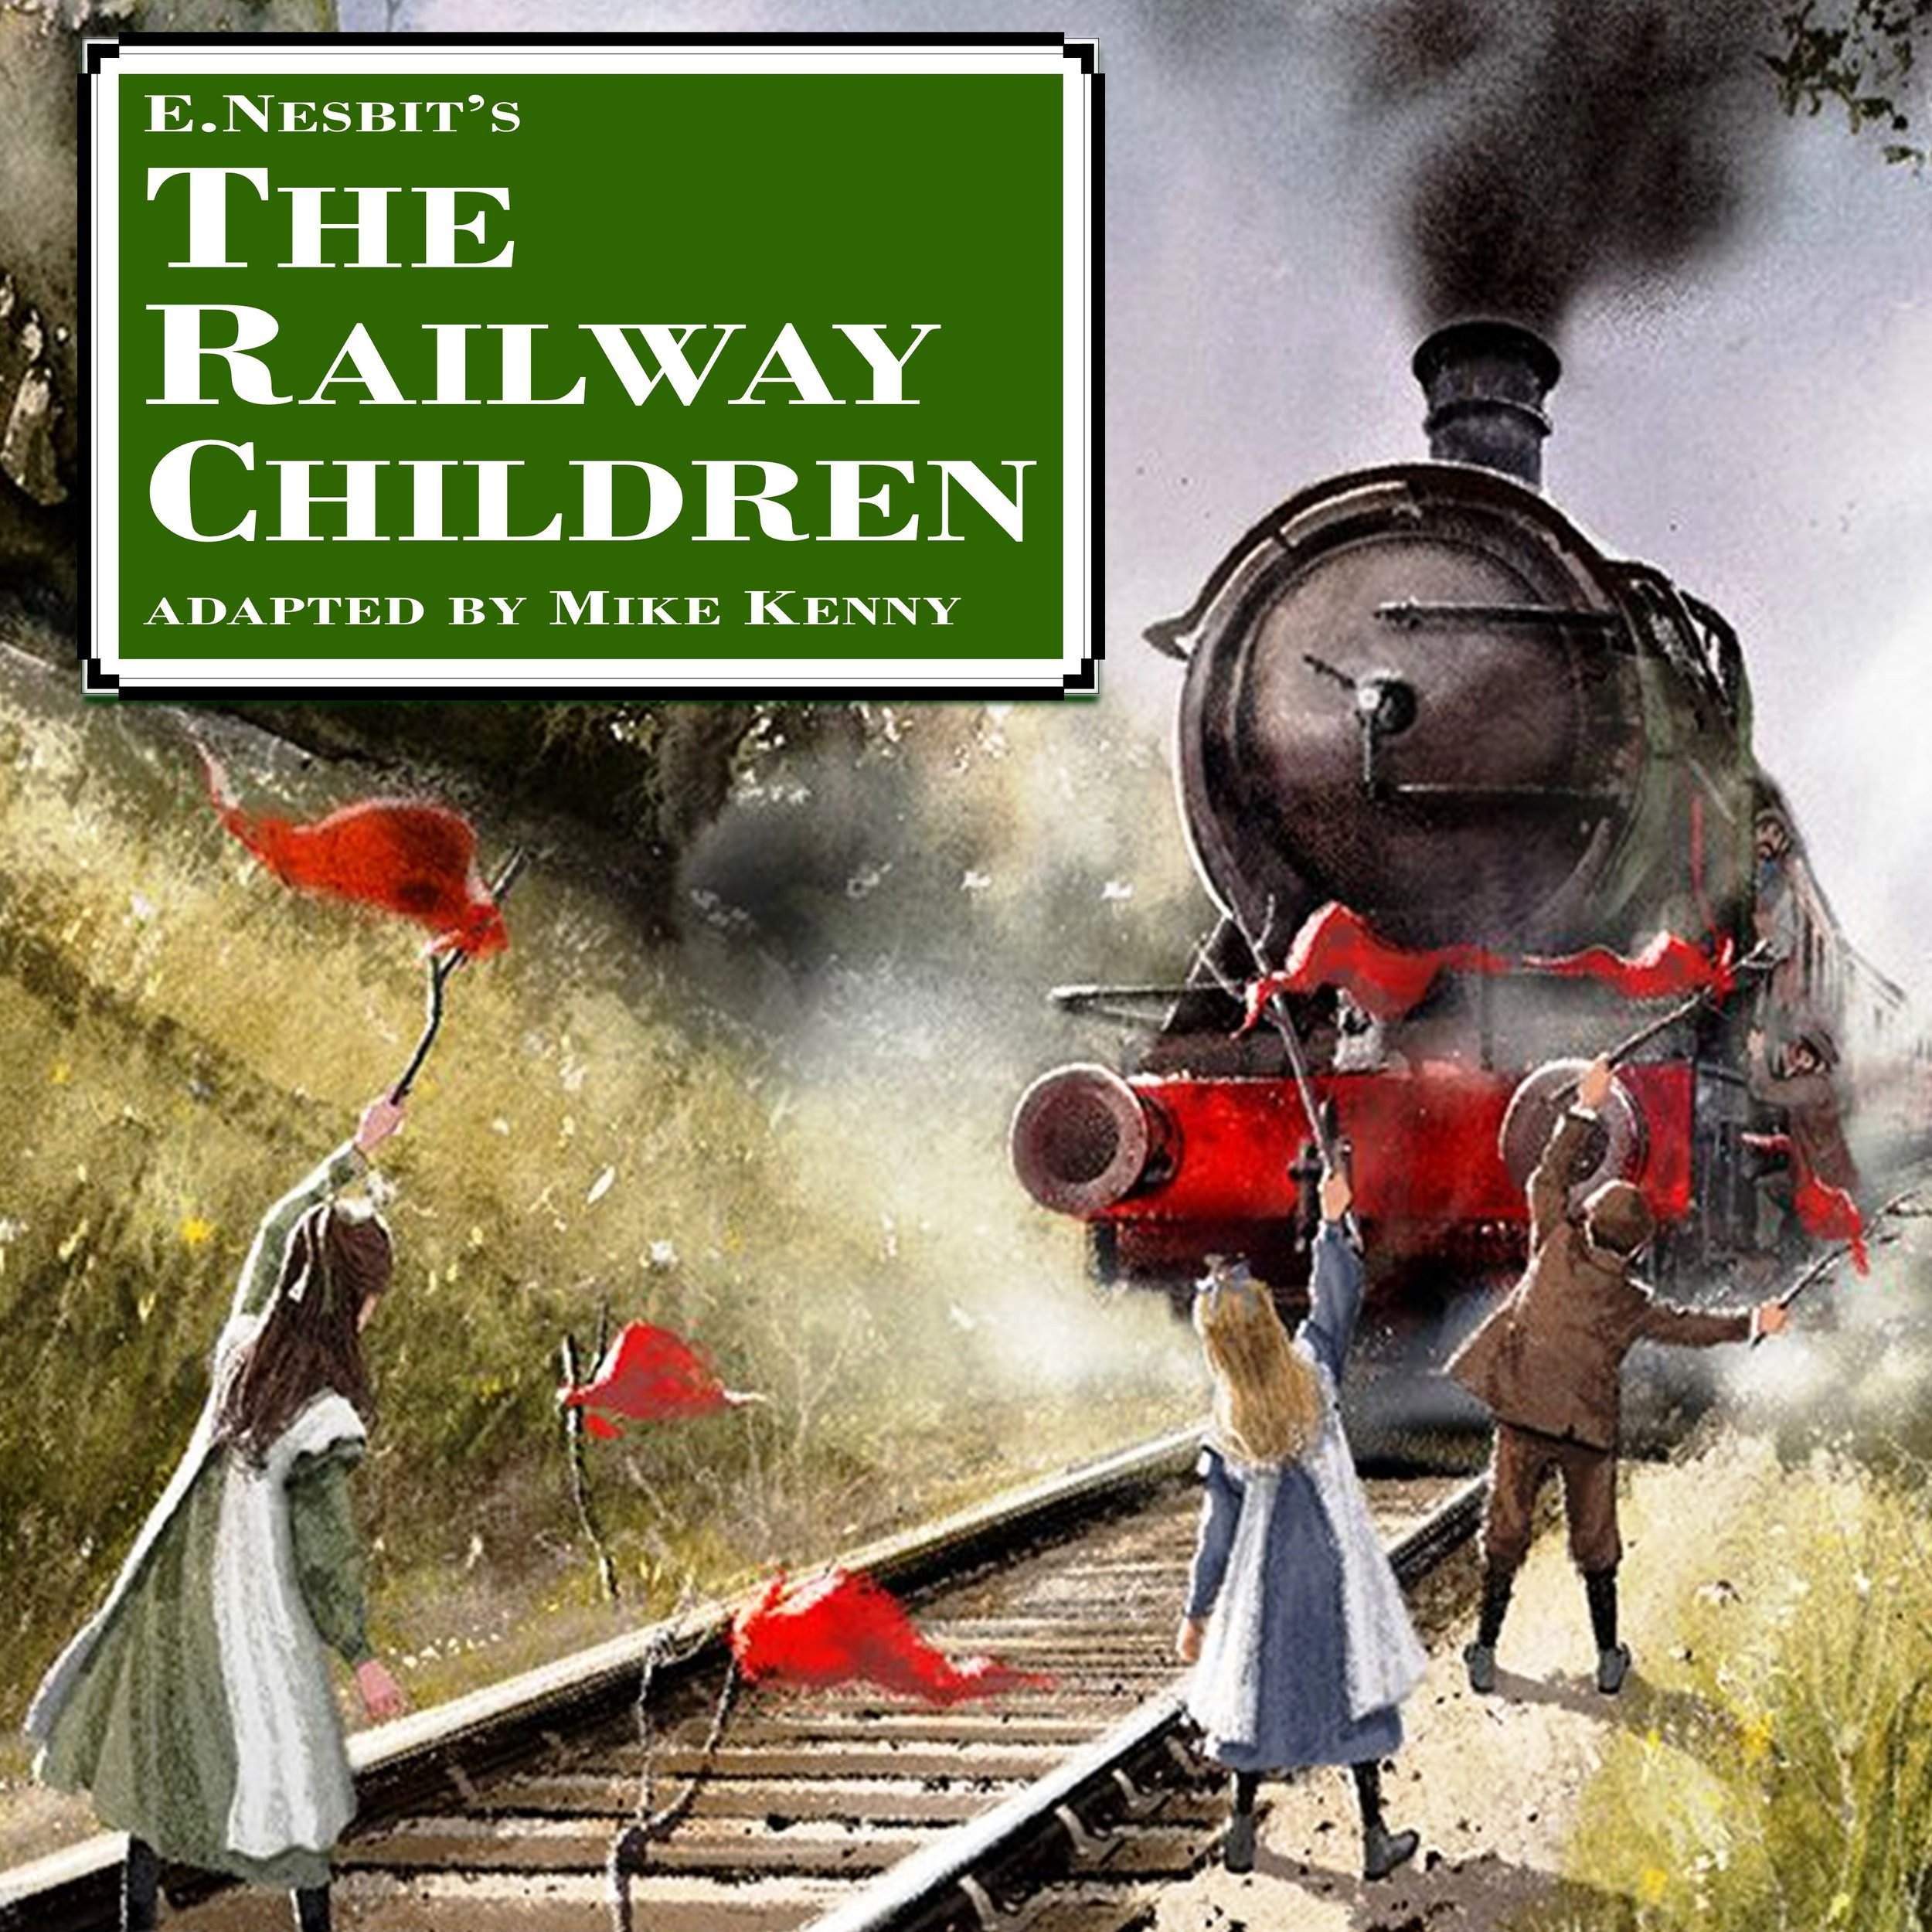 The Railway Children - Audition Date Sunday 24th April 2022, 5pm